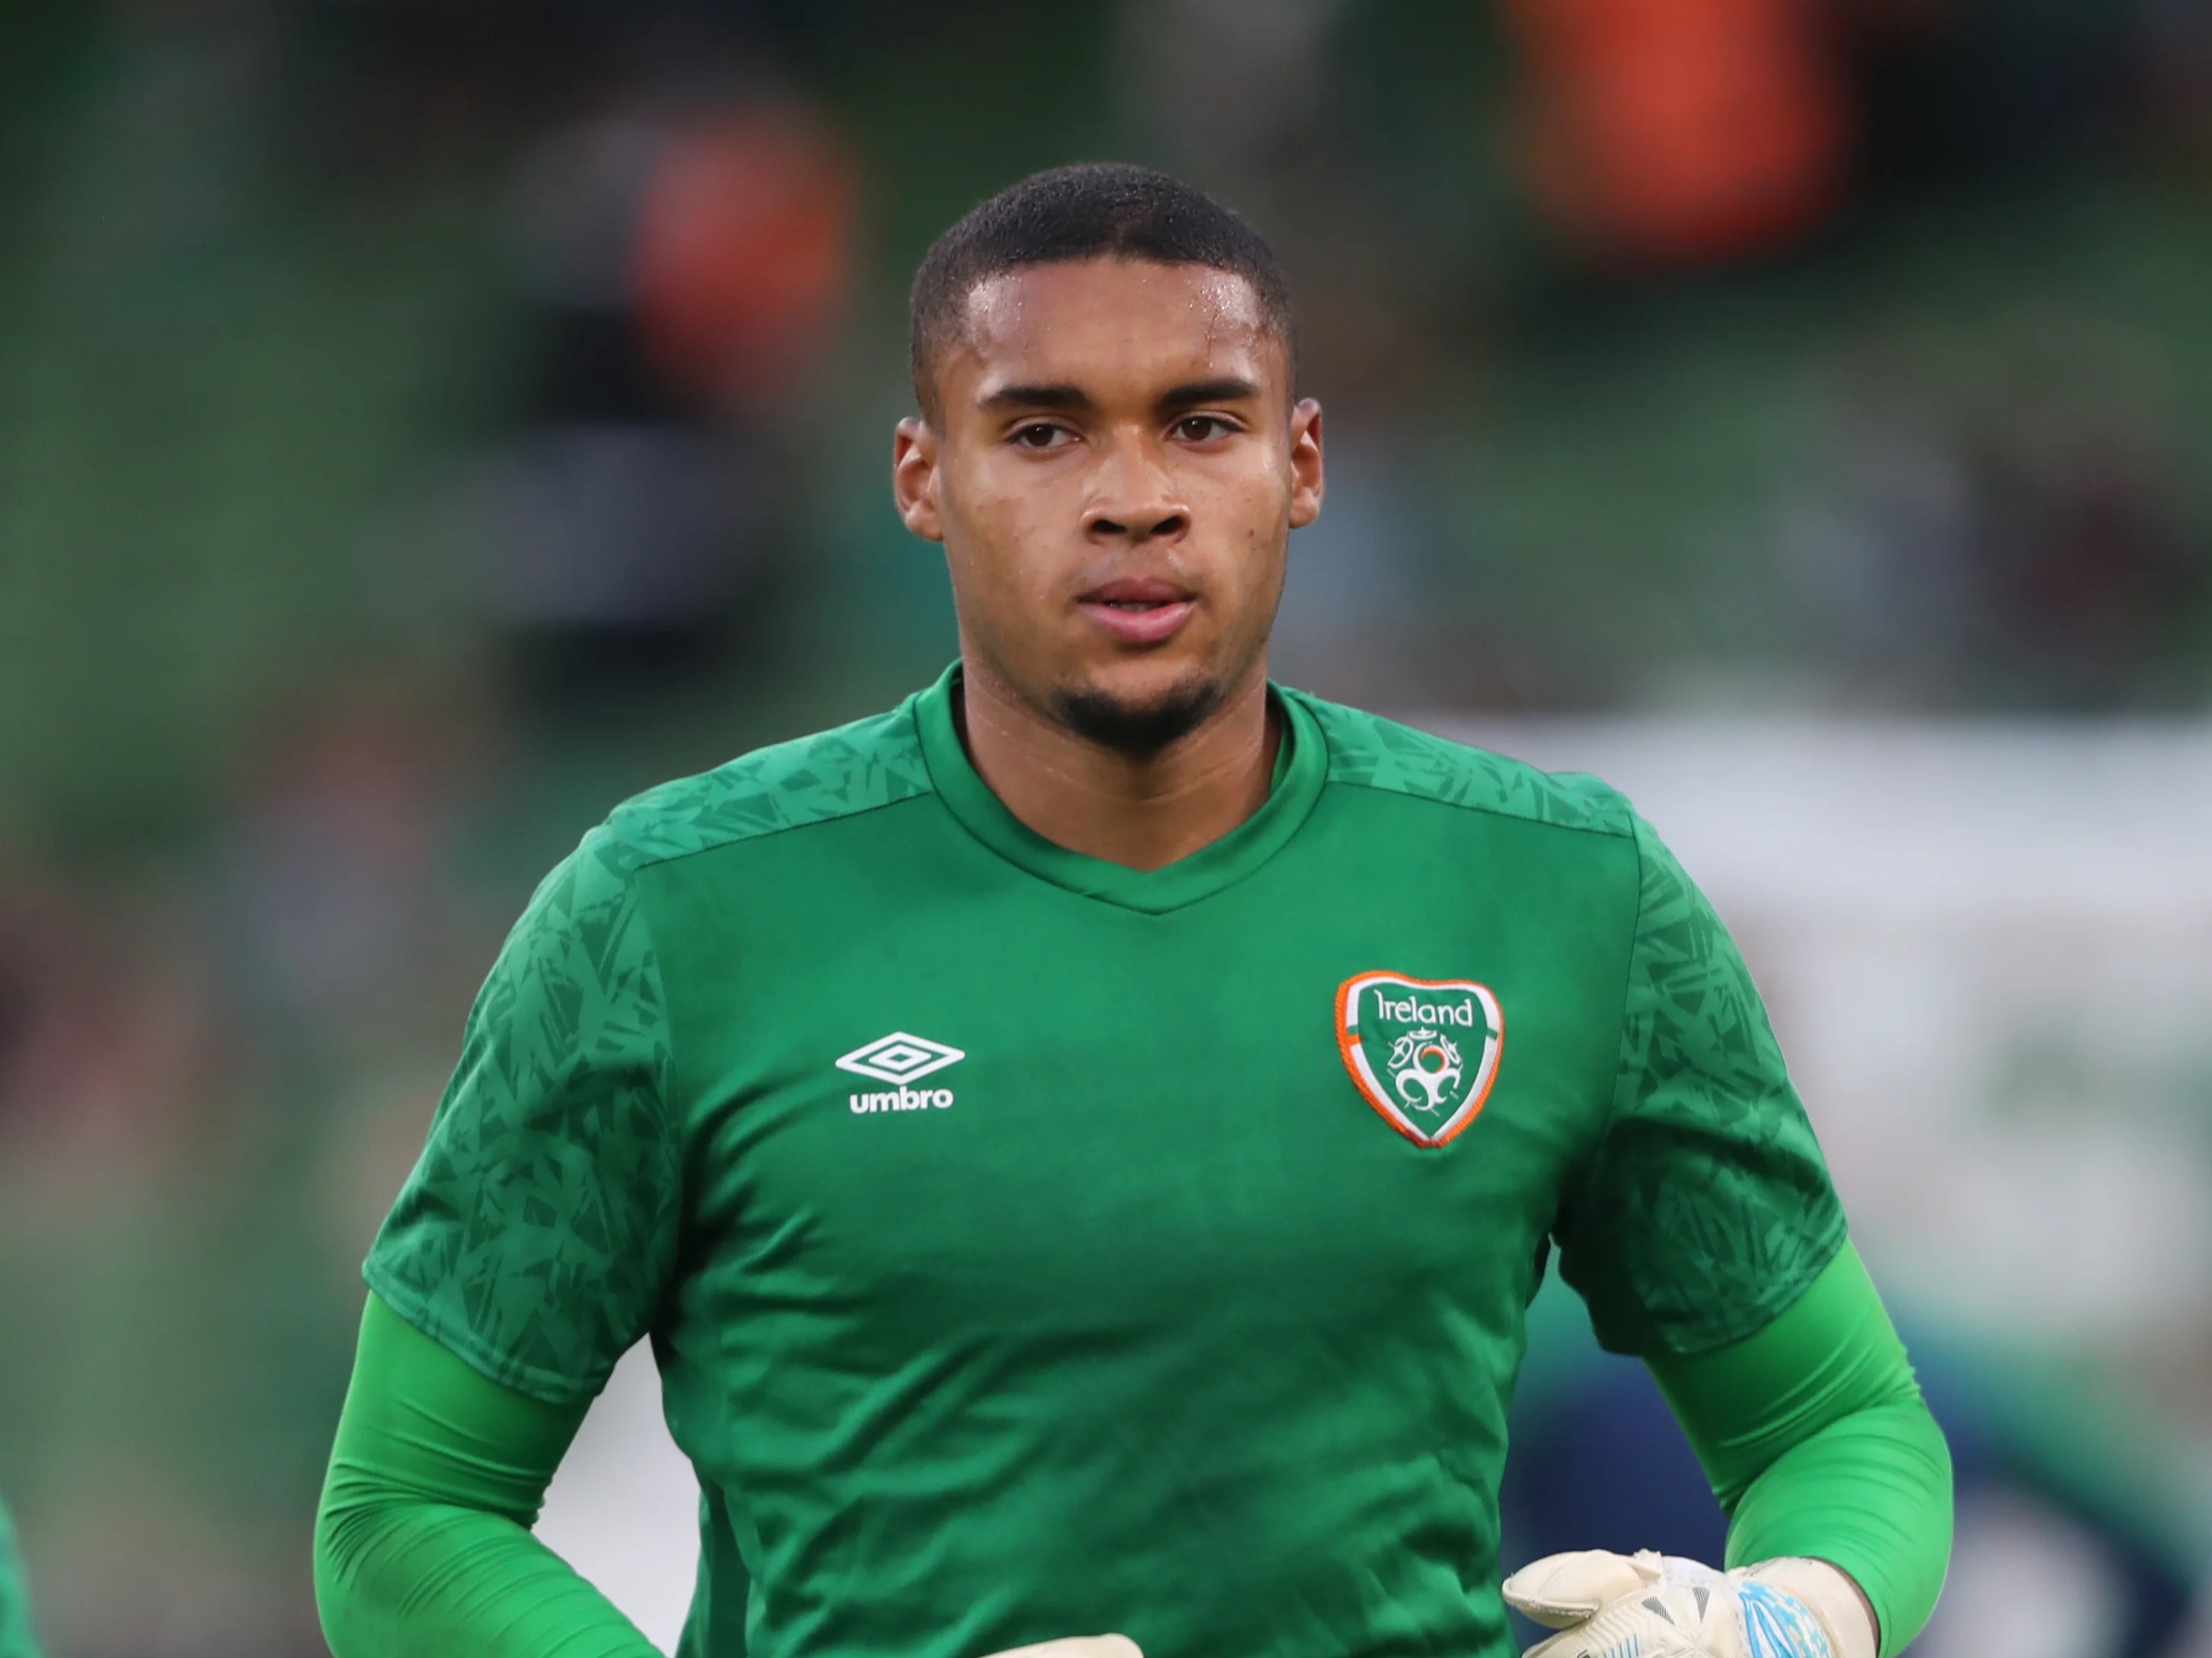 Gavin Bazunu has been ruled out of the Republic of Ireland’s three Nations League games by injury